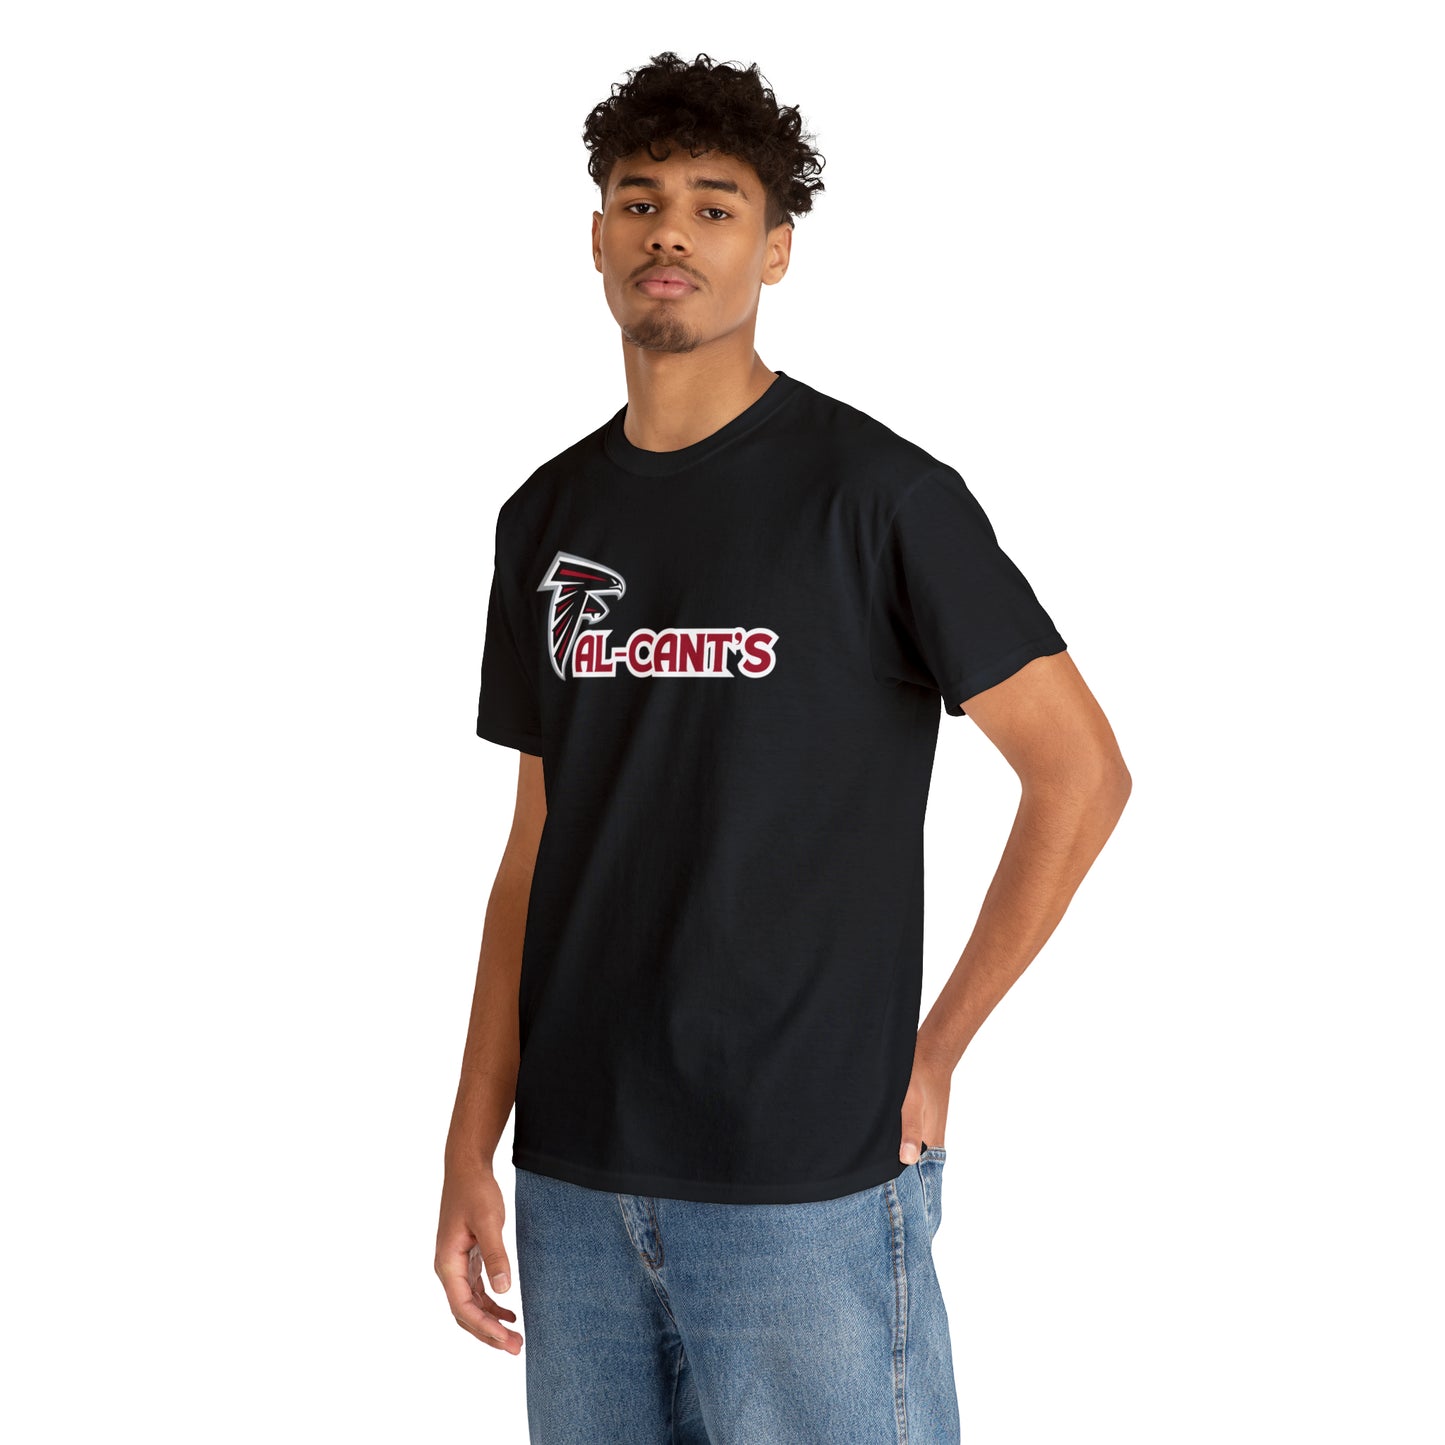 Fal-Cant's Unisex Heavy Cotton Tee